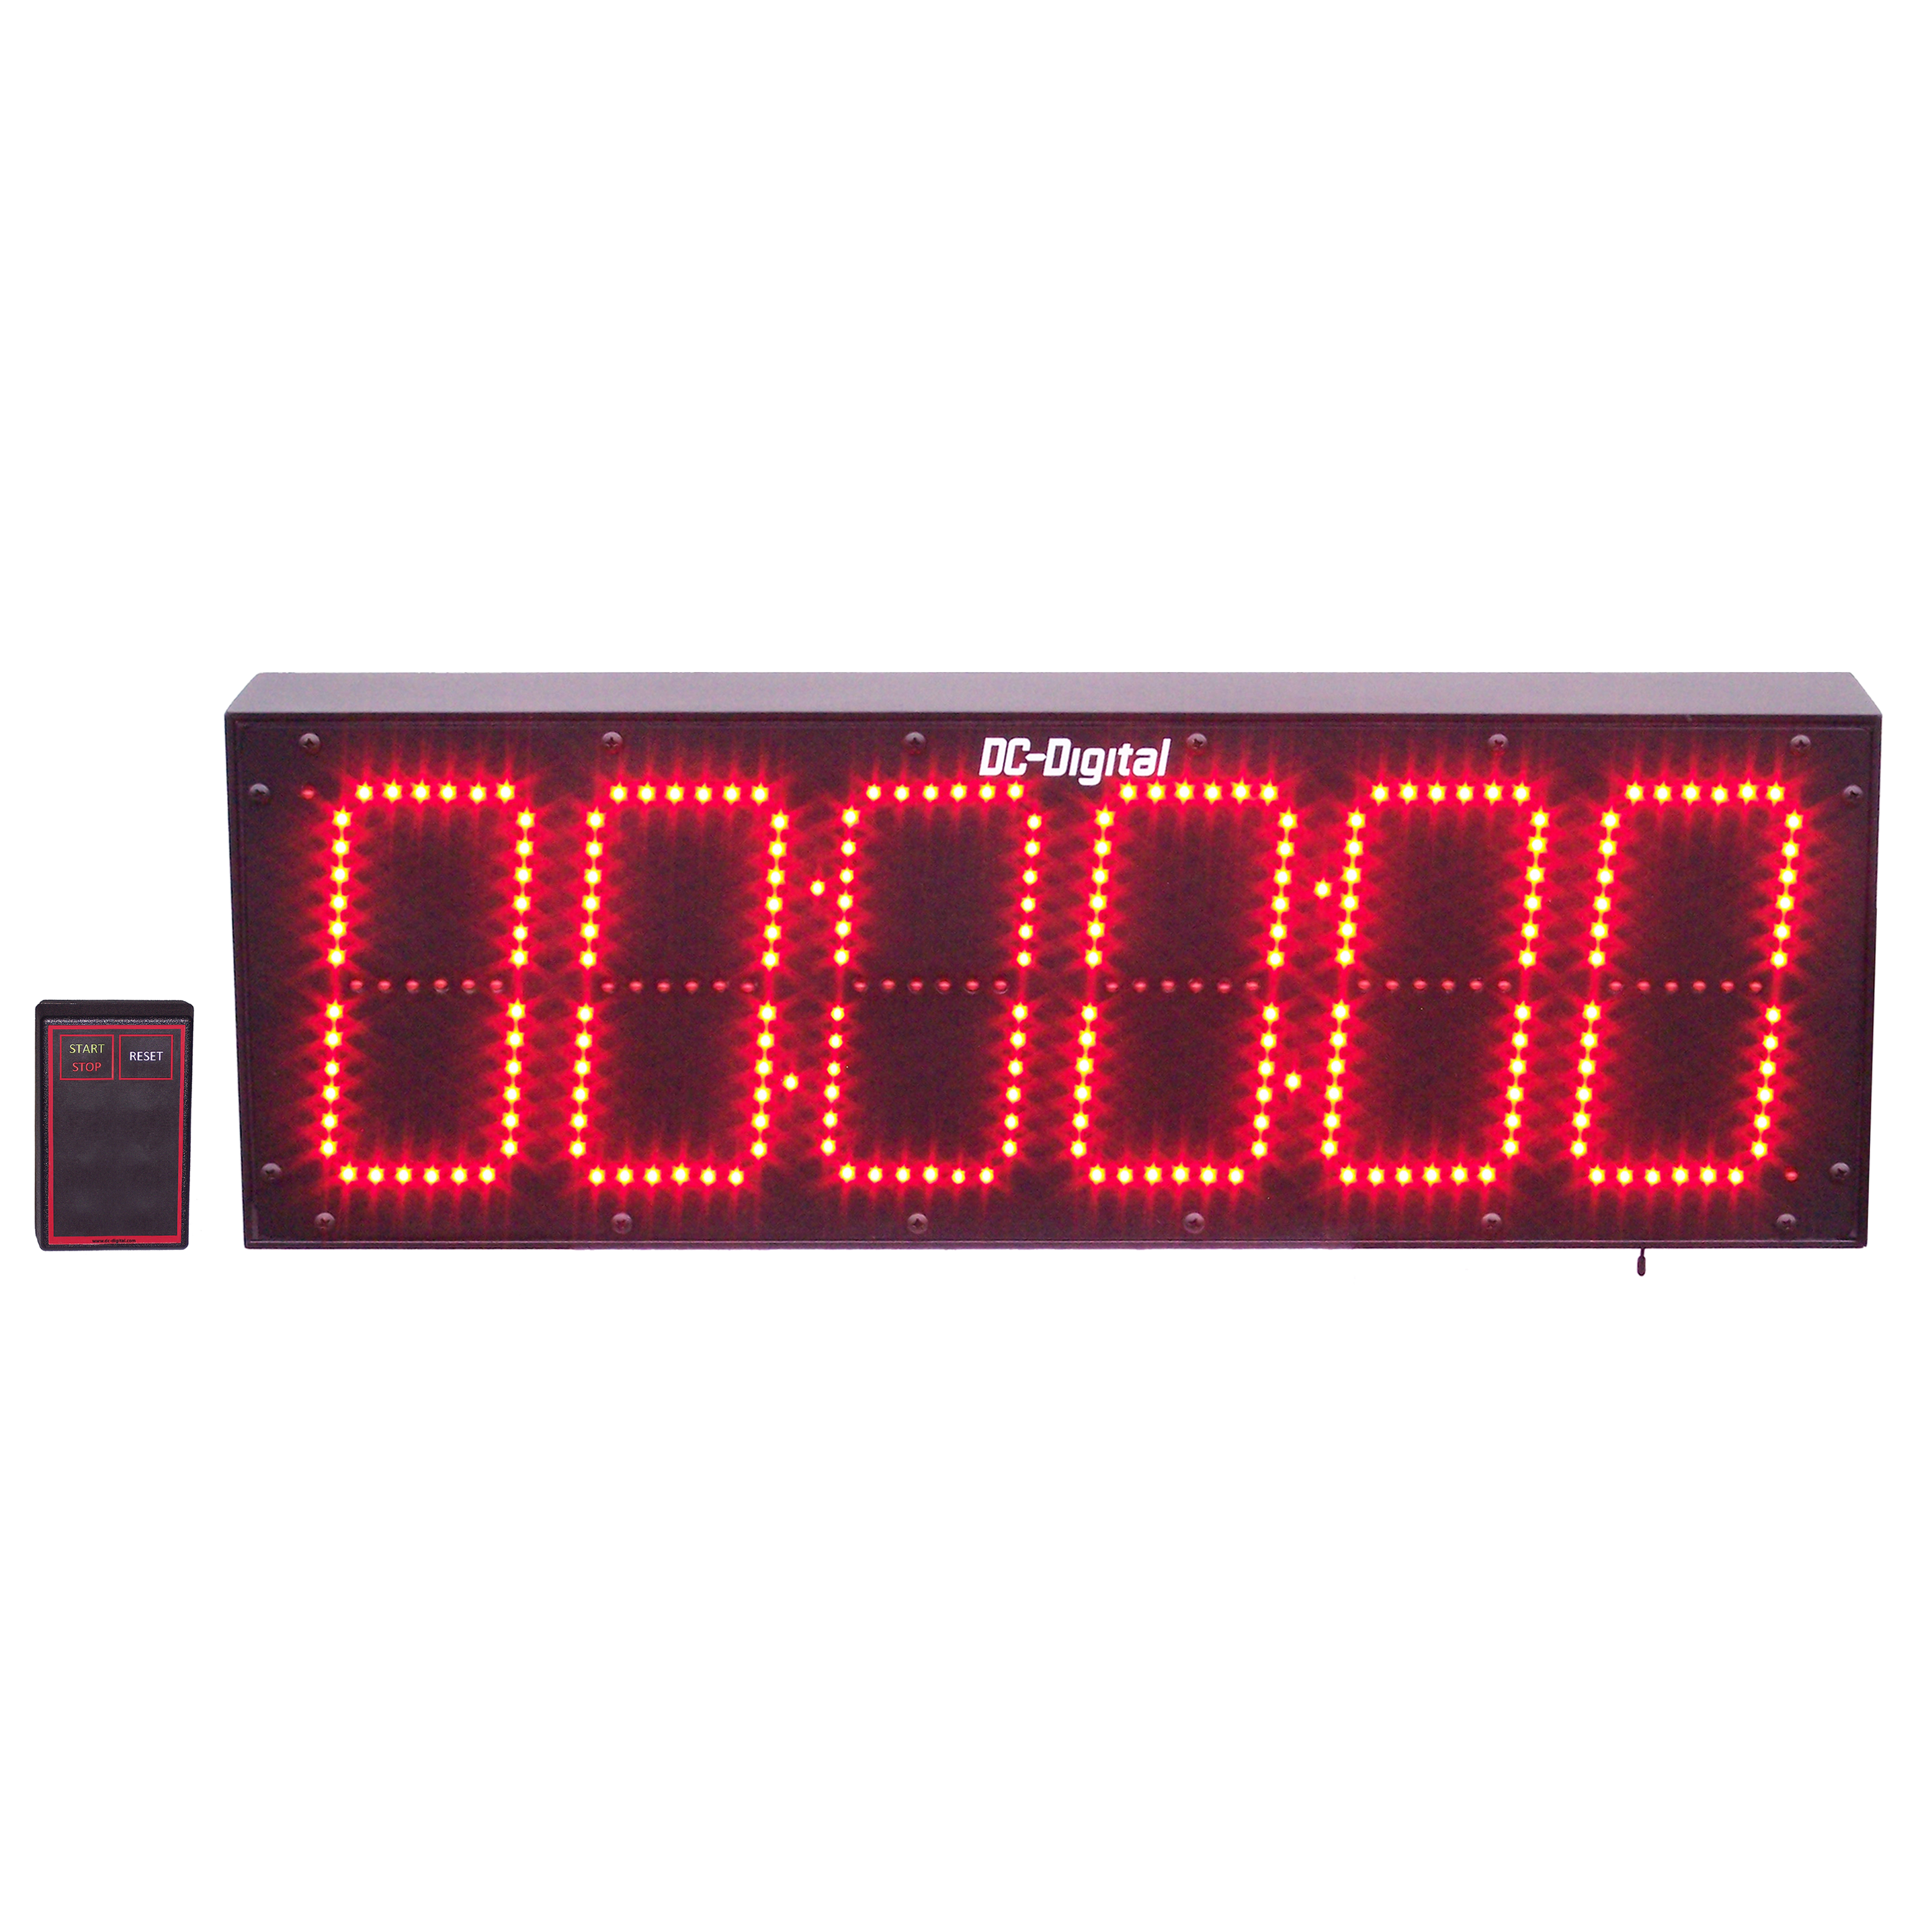 (DC-606T-UP-W-IN) 6.0 Inch LED Digital, RF-Wireless Handheld Controlled, Count Up Timer, Hours, Minutes, Seconds (INDOOR)